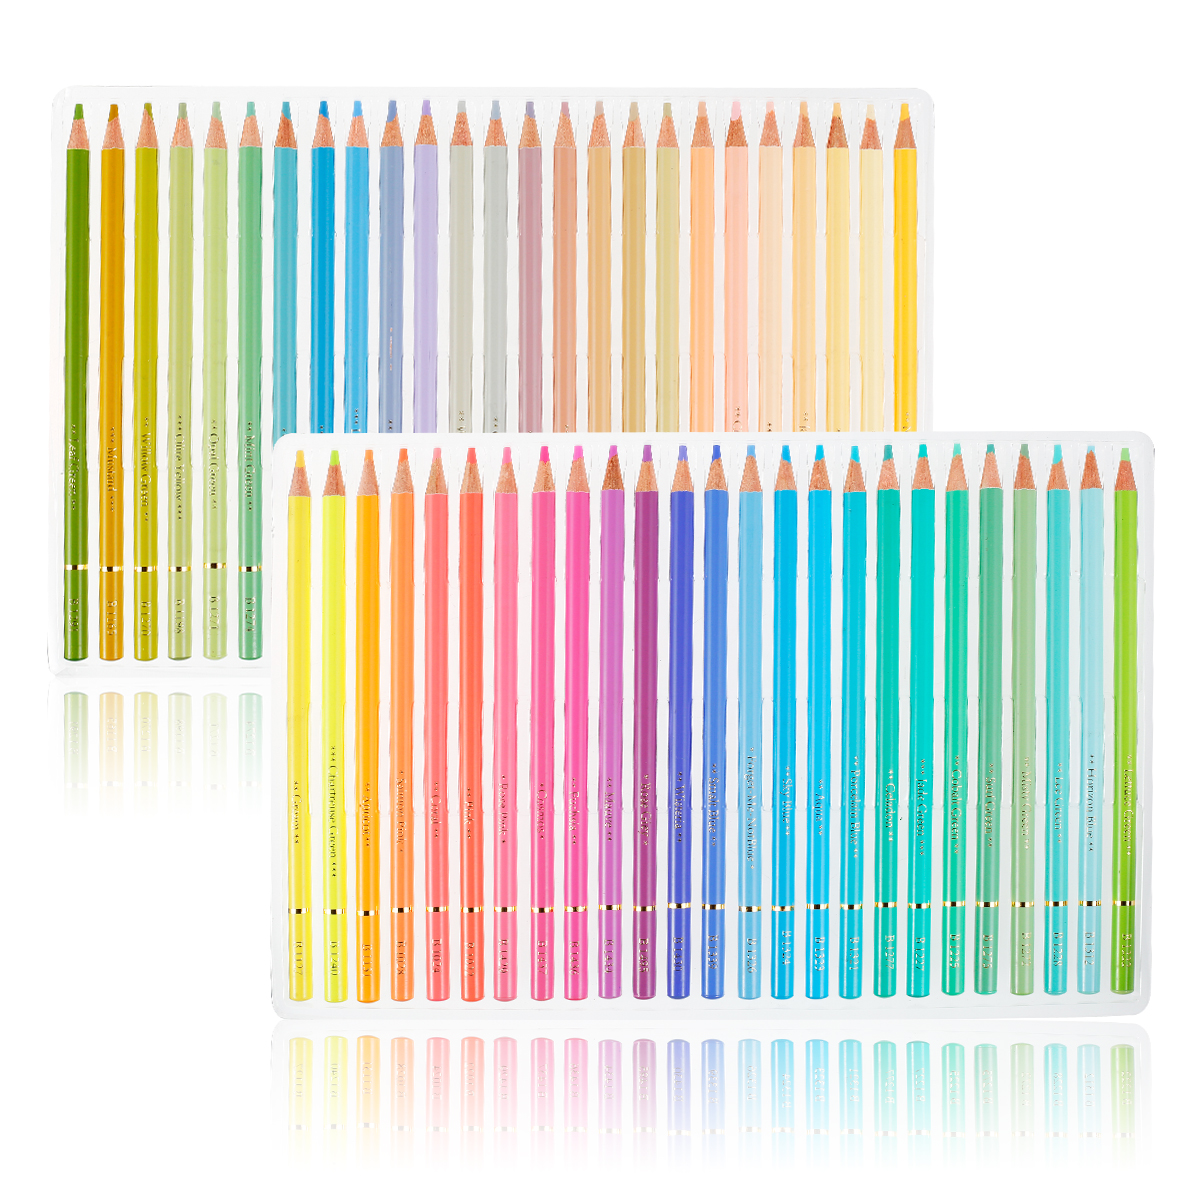 Toorise Count Oil Colored Pencils Set for Adults Macaron Colored Pencils Artists Drawing Colored Pencils Set Soften Wooden Oil Pastel Colored Pencils